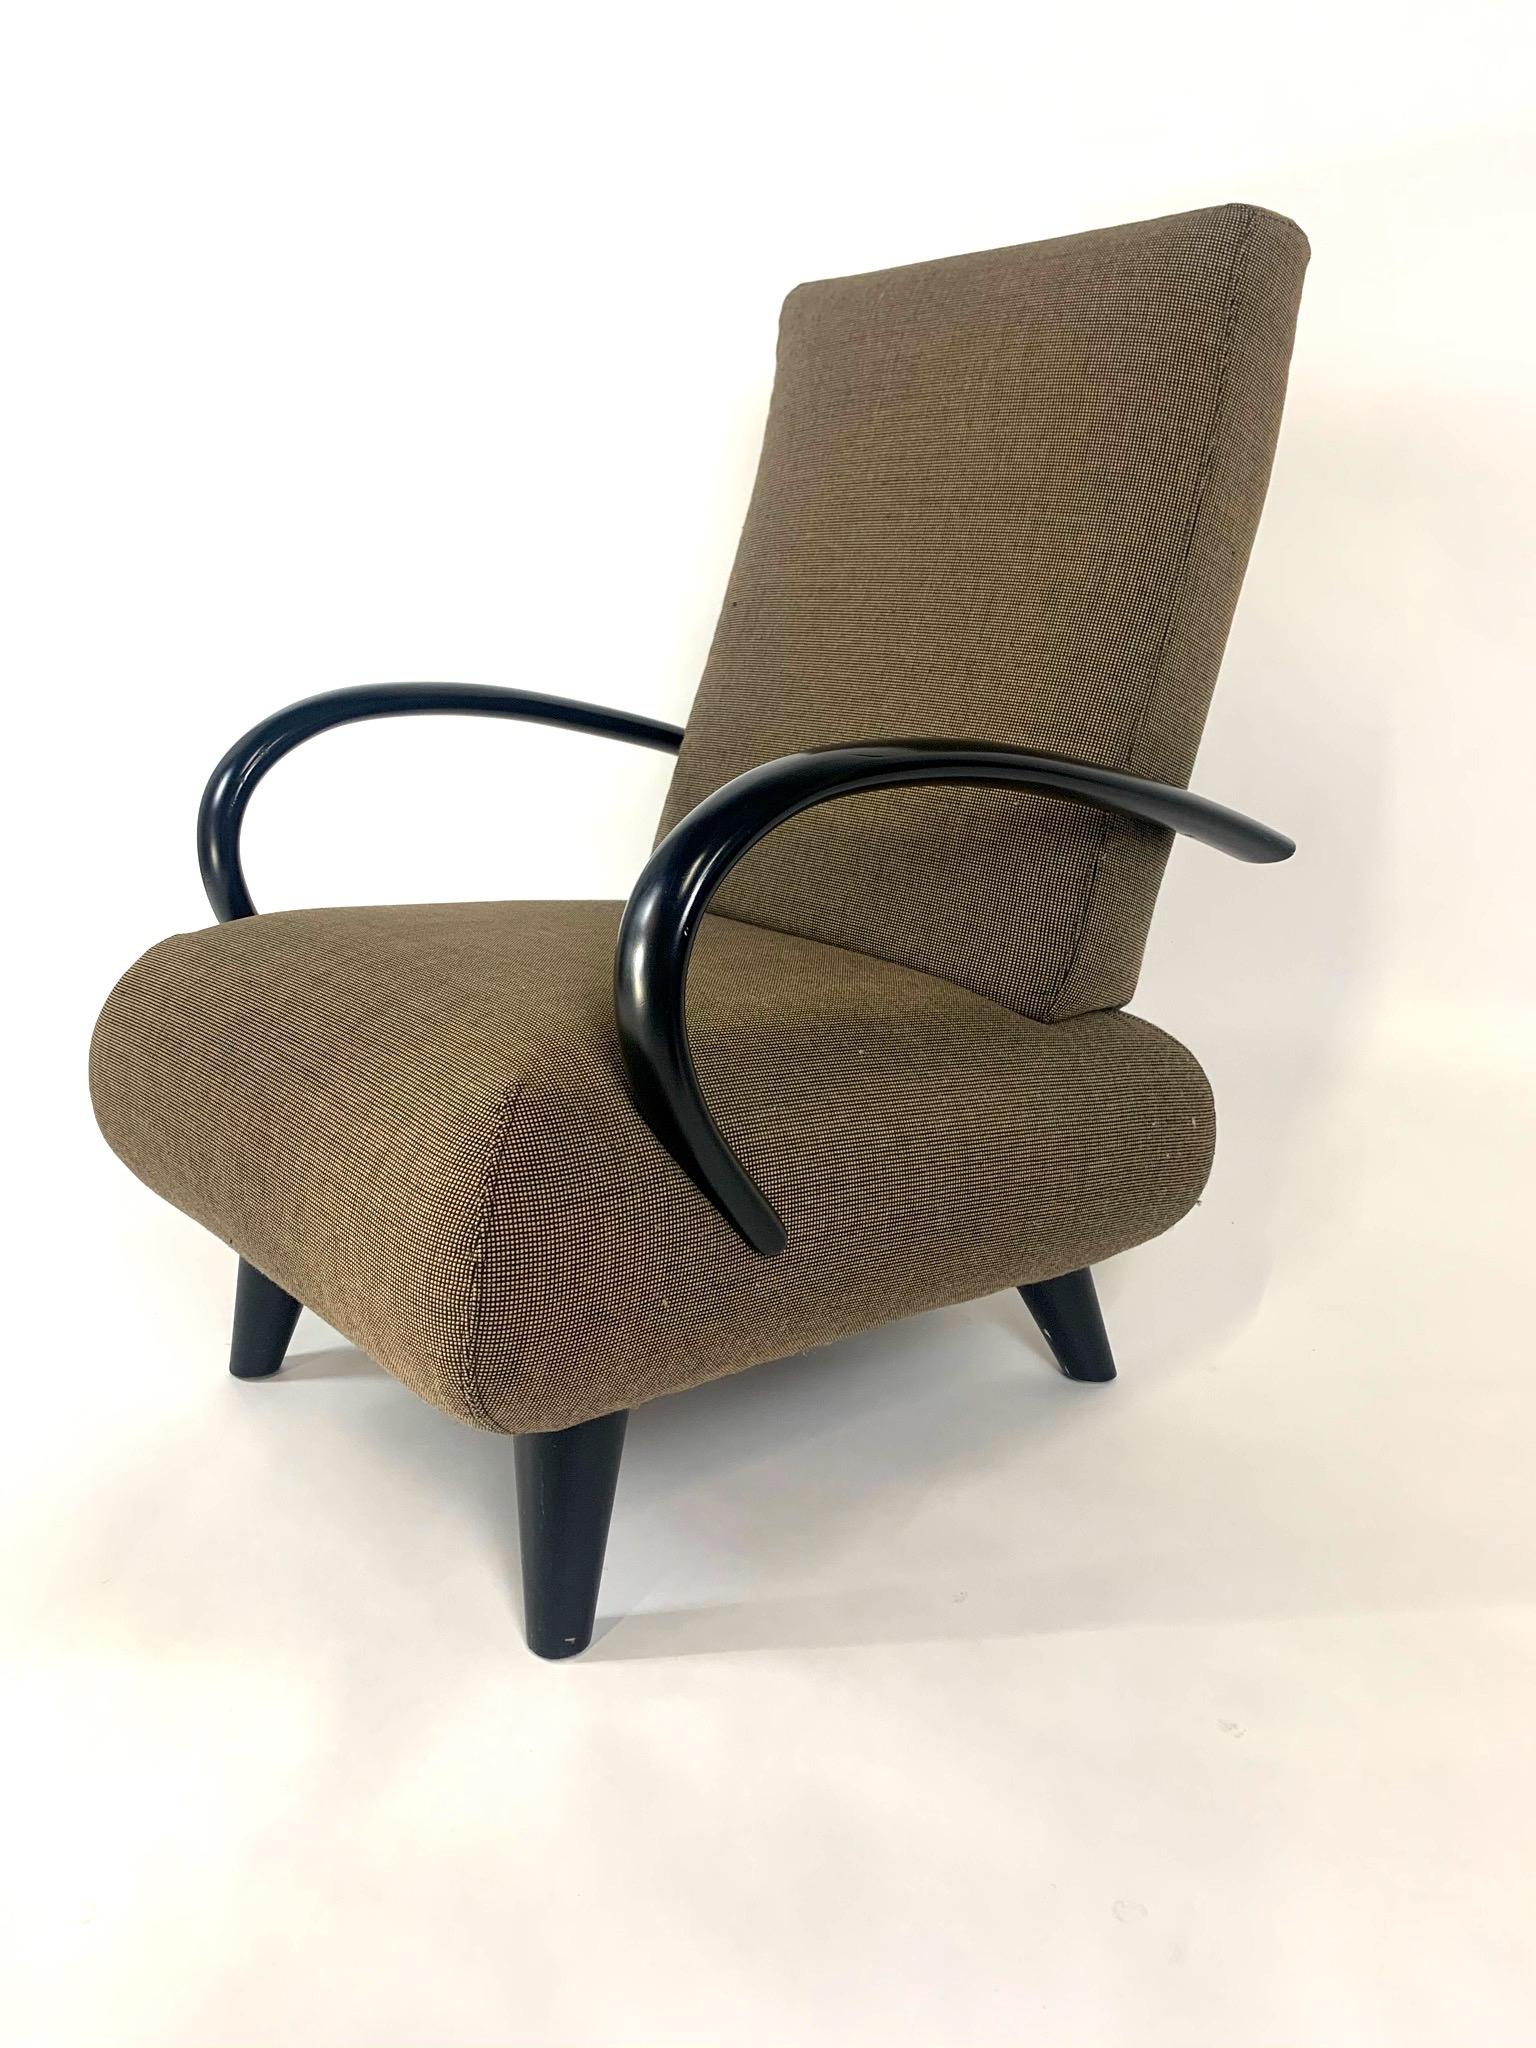 Amazingly comfortable pair of lounge chairs made by the Austrian maker Wittmann. Designed by renowned modern designer Sebastian Herkner. These chairs are extraordinarily designed for comfort and style. Simply stunning in person.